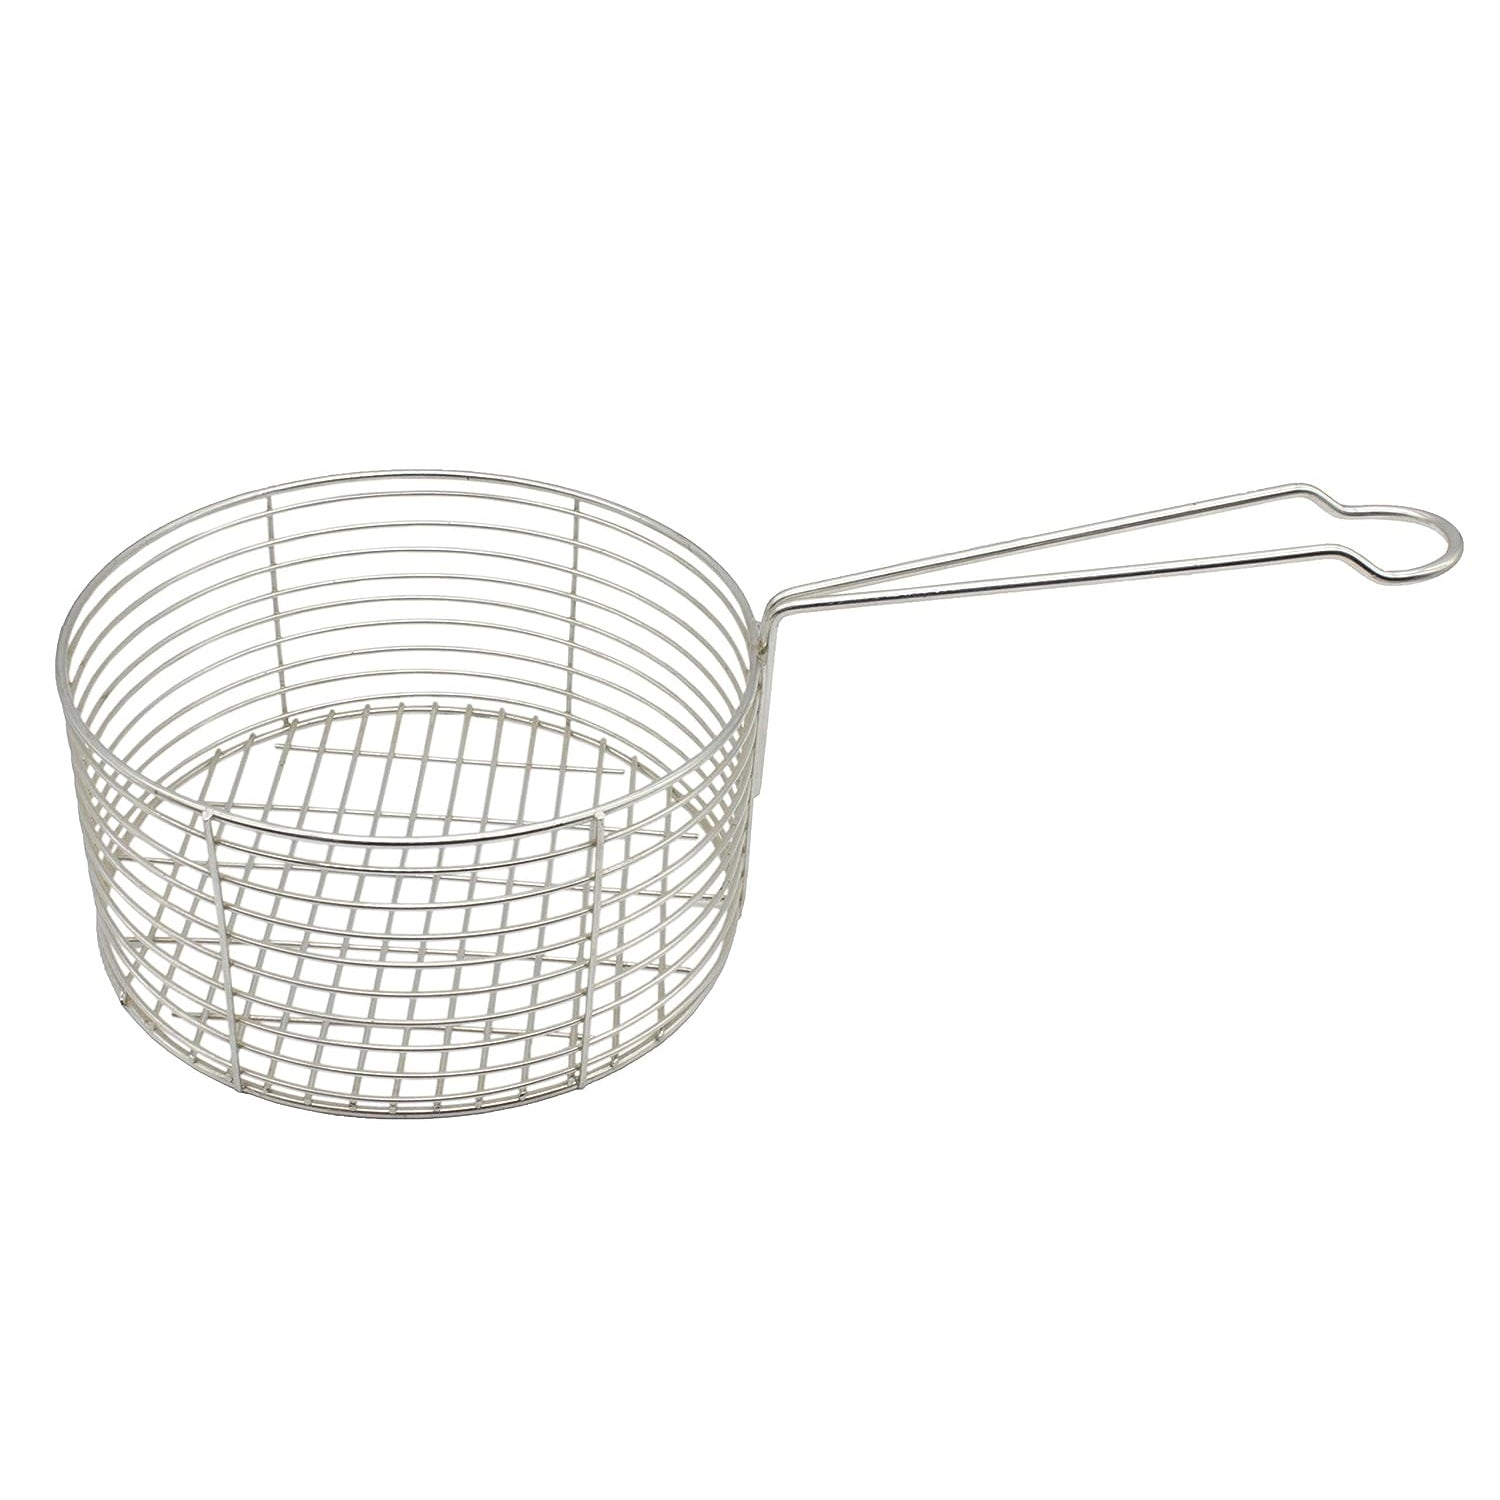 Chip Frying Stainless Steel Basket 18 cm